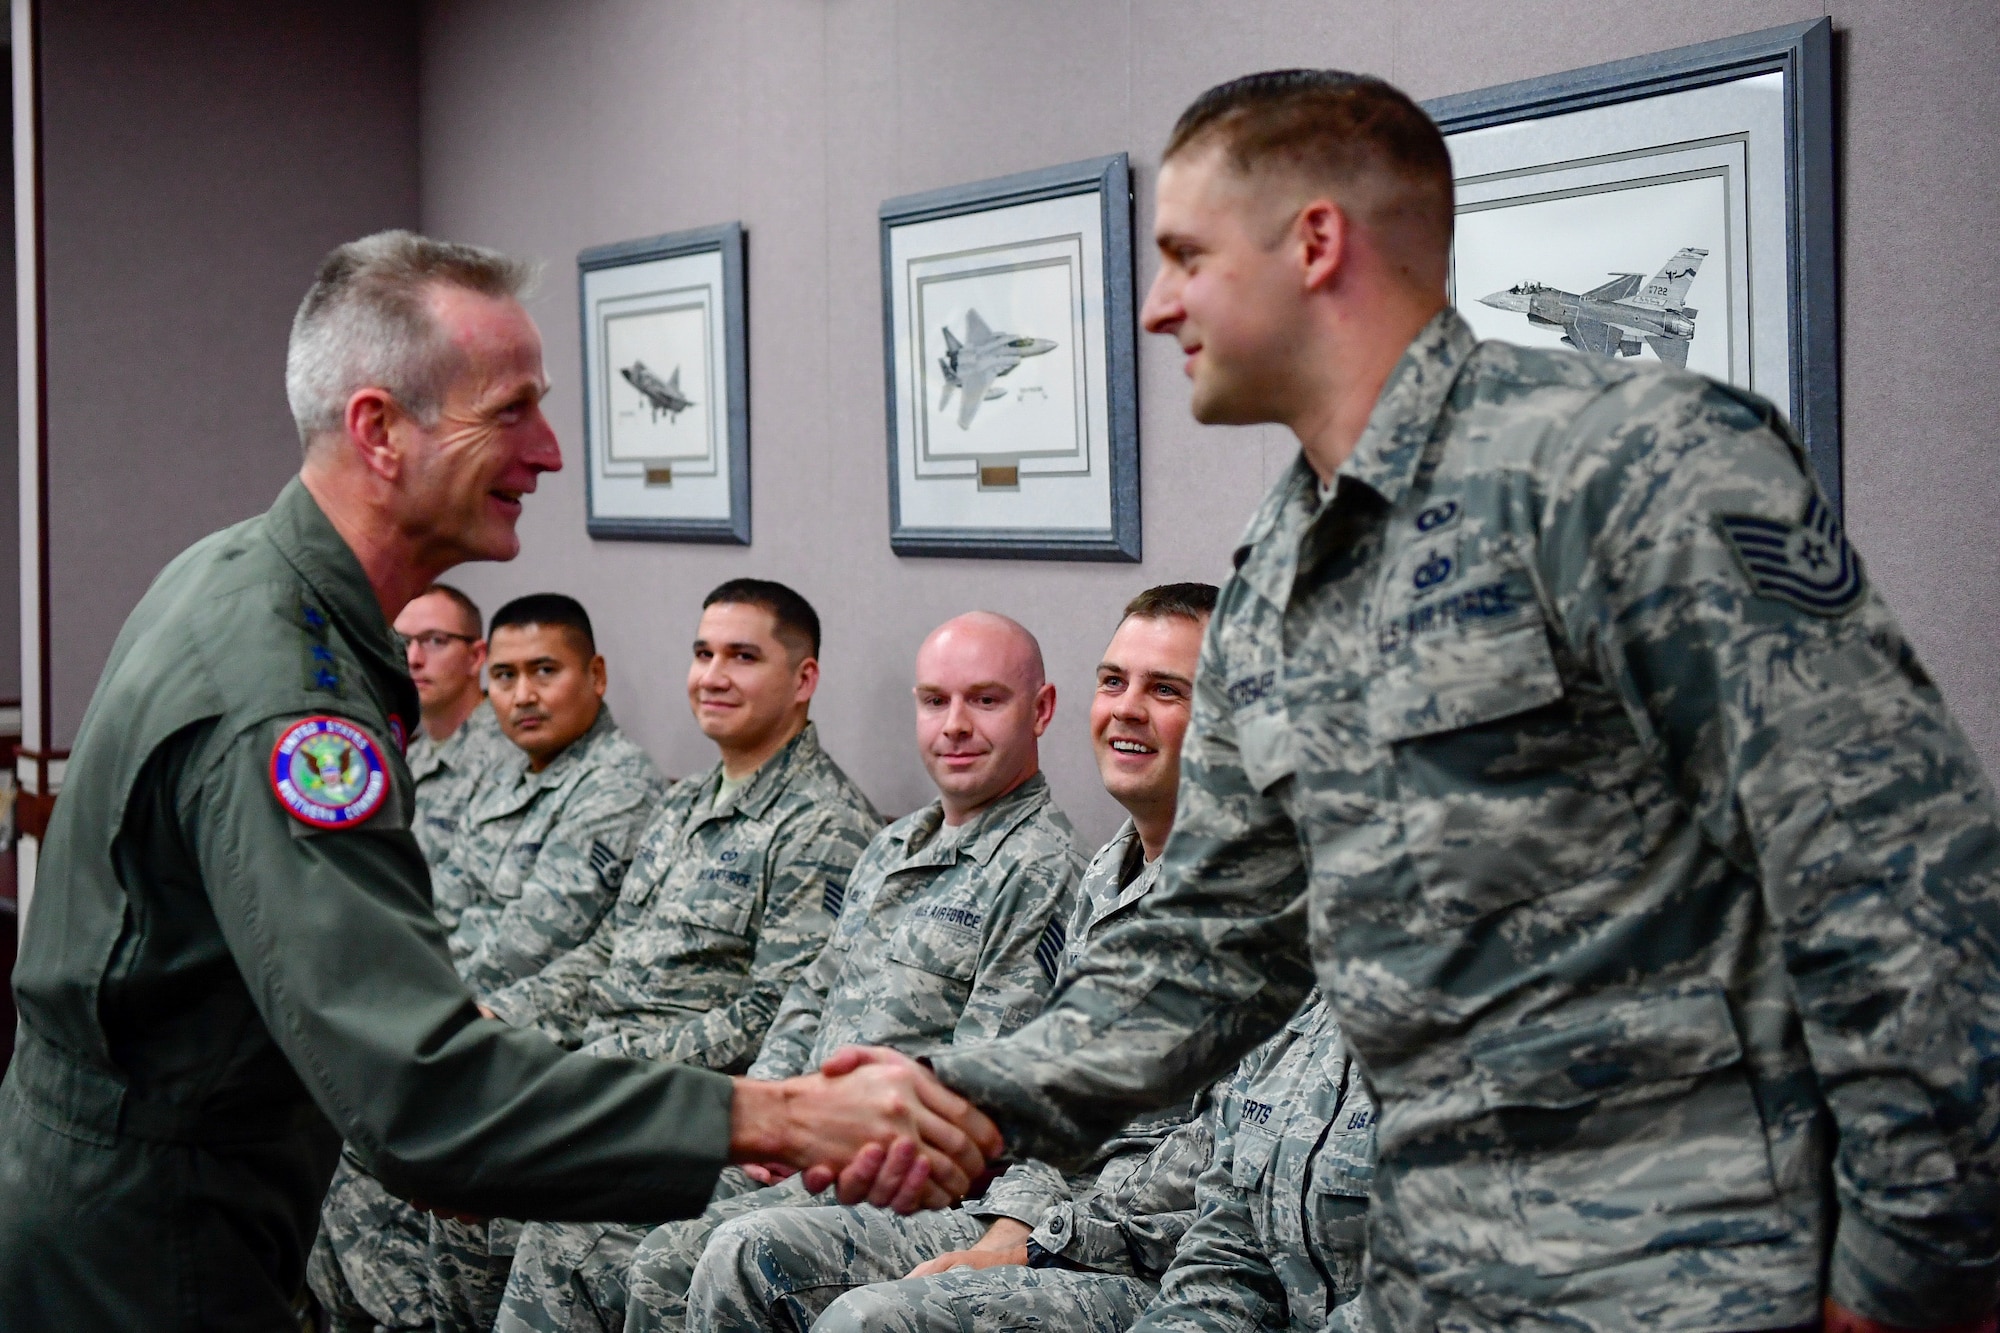 Gen. Terrence O'Shaughnessy, NORAD and USNORTHCOM commander, recognizes Tech. Sgt. Aaron DeCremer, 225th Air Defense Squadron weapons director, with a commander’s coin for the critical role he played during the Aug. 10, 2018 F-15 fighter intercept of the stolen Horizon Bombardier Q400 aircraft out of SeaTac International Airport.  O'Shaughnessy visited the WADS Aug. 23 in order to commend the WADS operations crew for their expert command and control of the 142nd Fighter Wing's F-15 intercept of the stolen aircraft. (U.S. Air National Guard photo by Maj. Kimberly D. Burke)